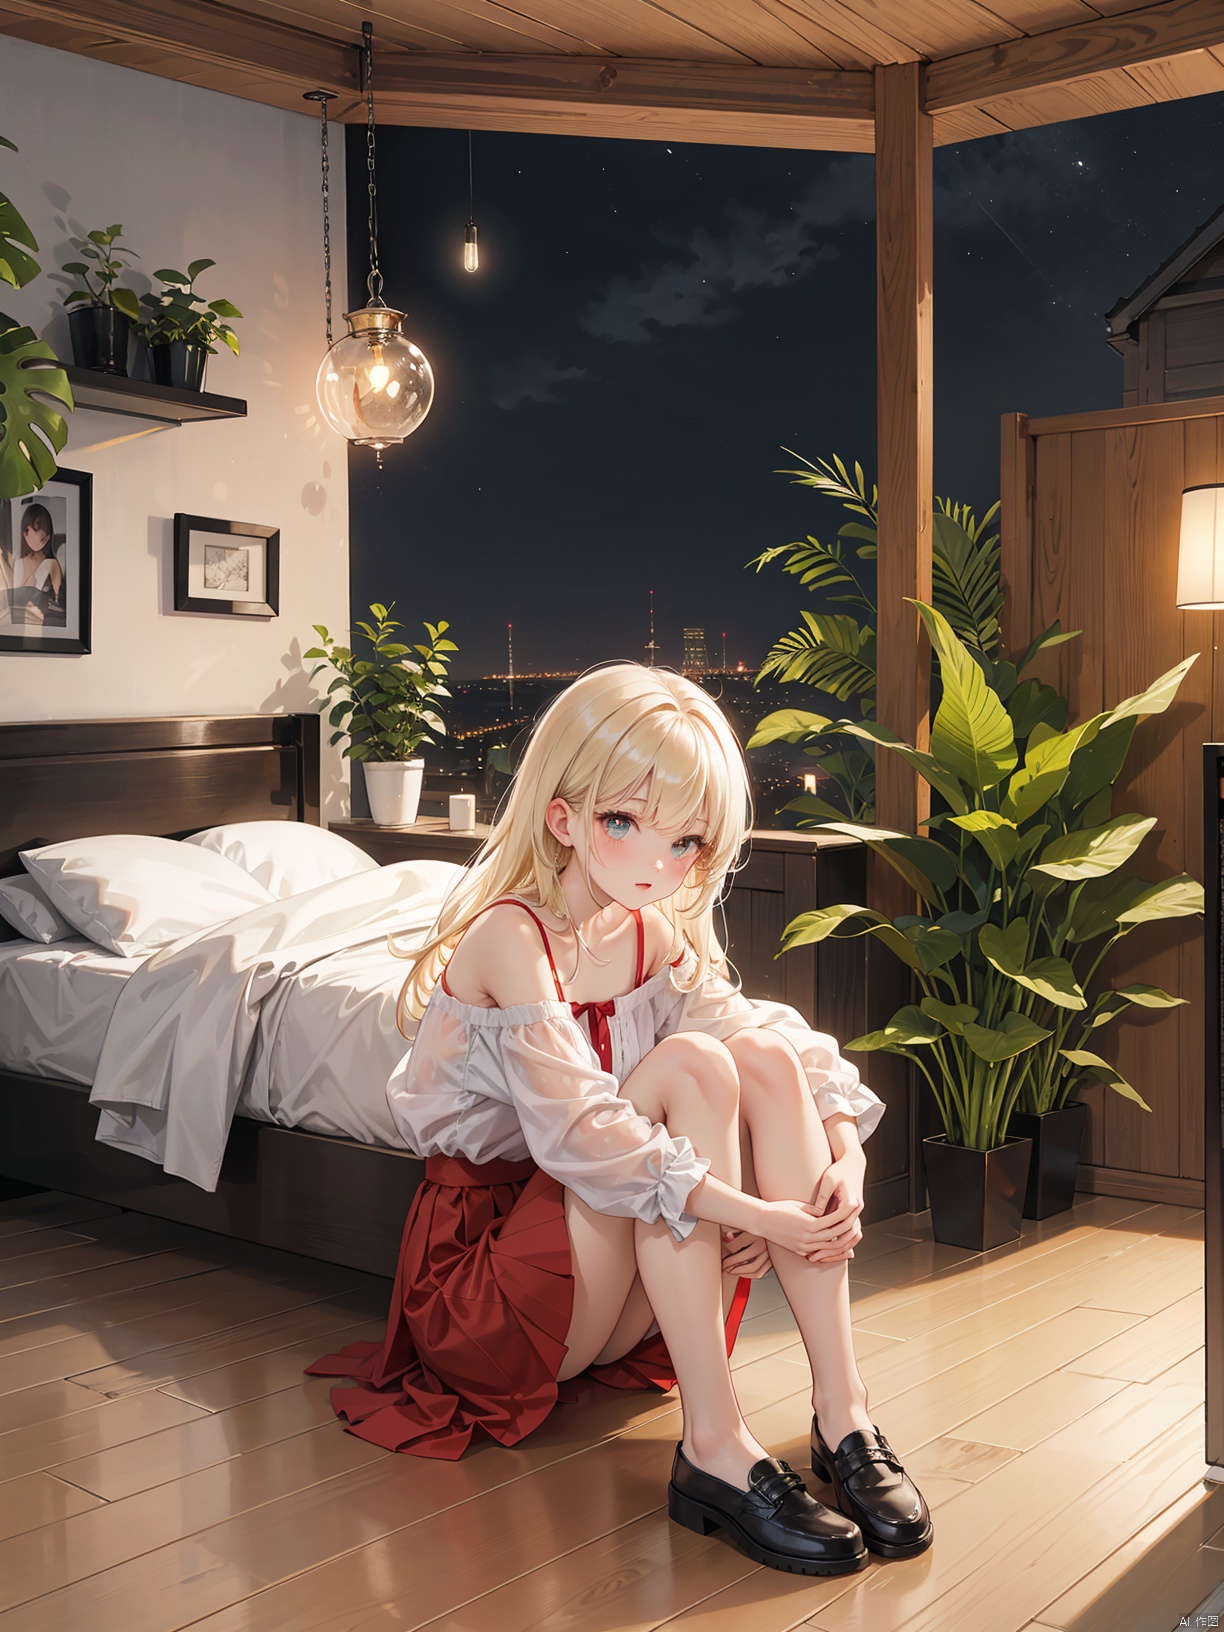  Beautiful figure, bangs, long hair, black eye,night, sitting in the room, bedroom, interior design, indoor plants, outdoor view, blonde hair, rose red pupils, girl, full body photo, leg rings, black top, long hem, covering hands, red skirt, short hem, revealing collarbone, off the shoulder, small leather shoes